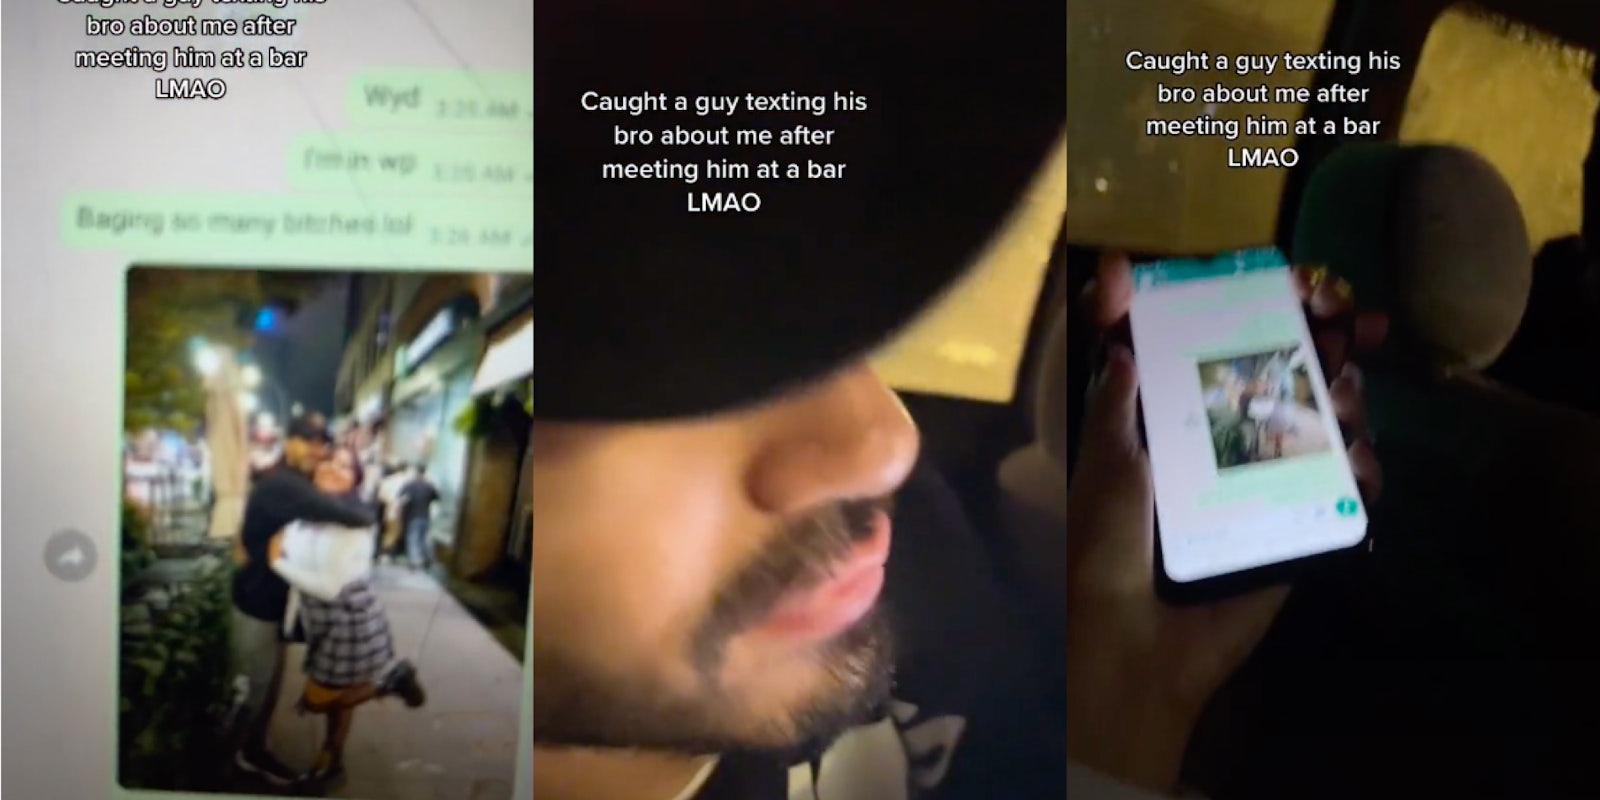 Woman records text messages from a man's phone